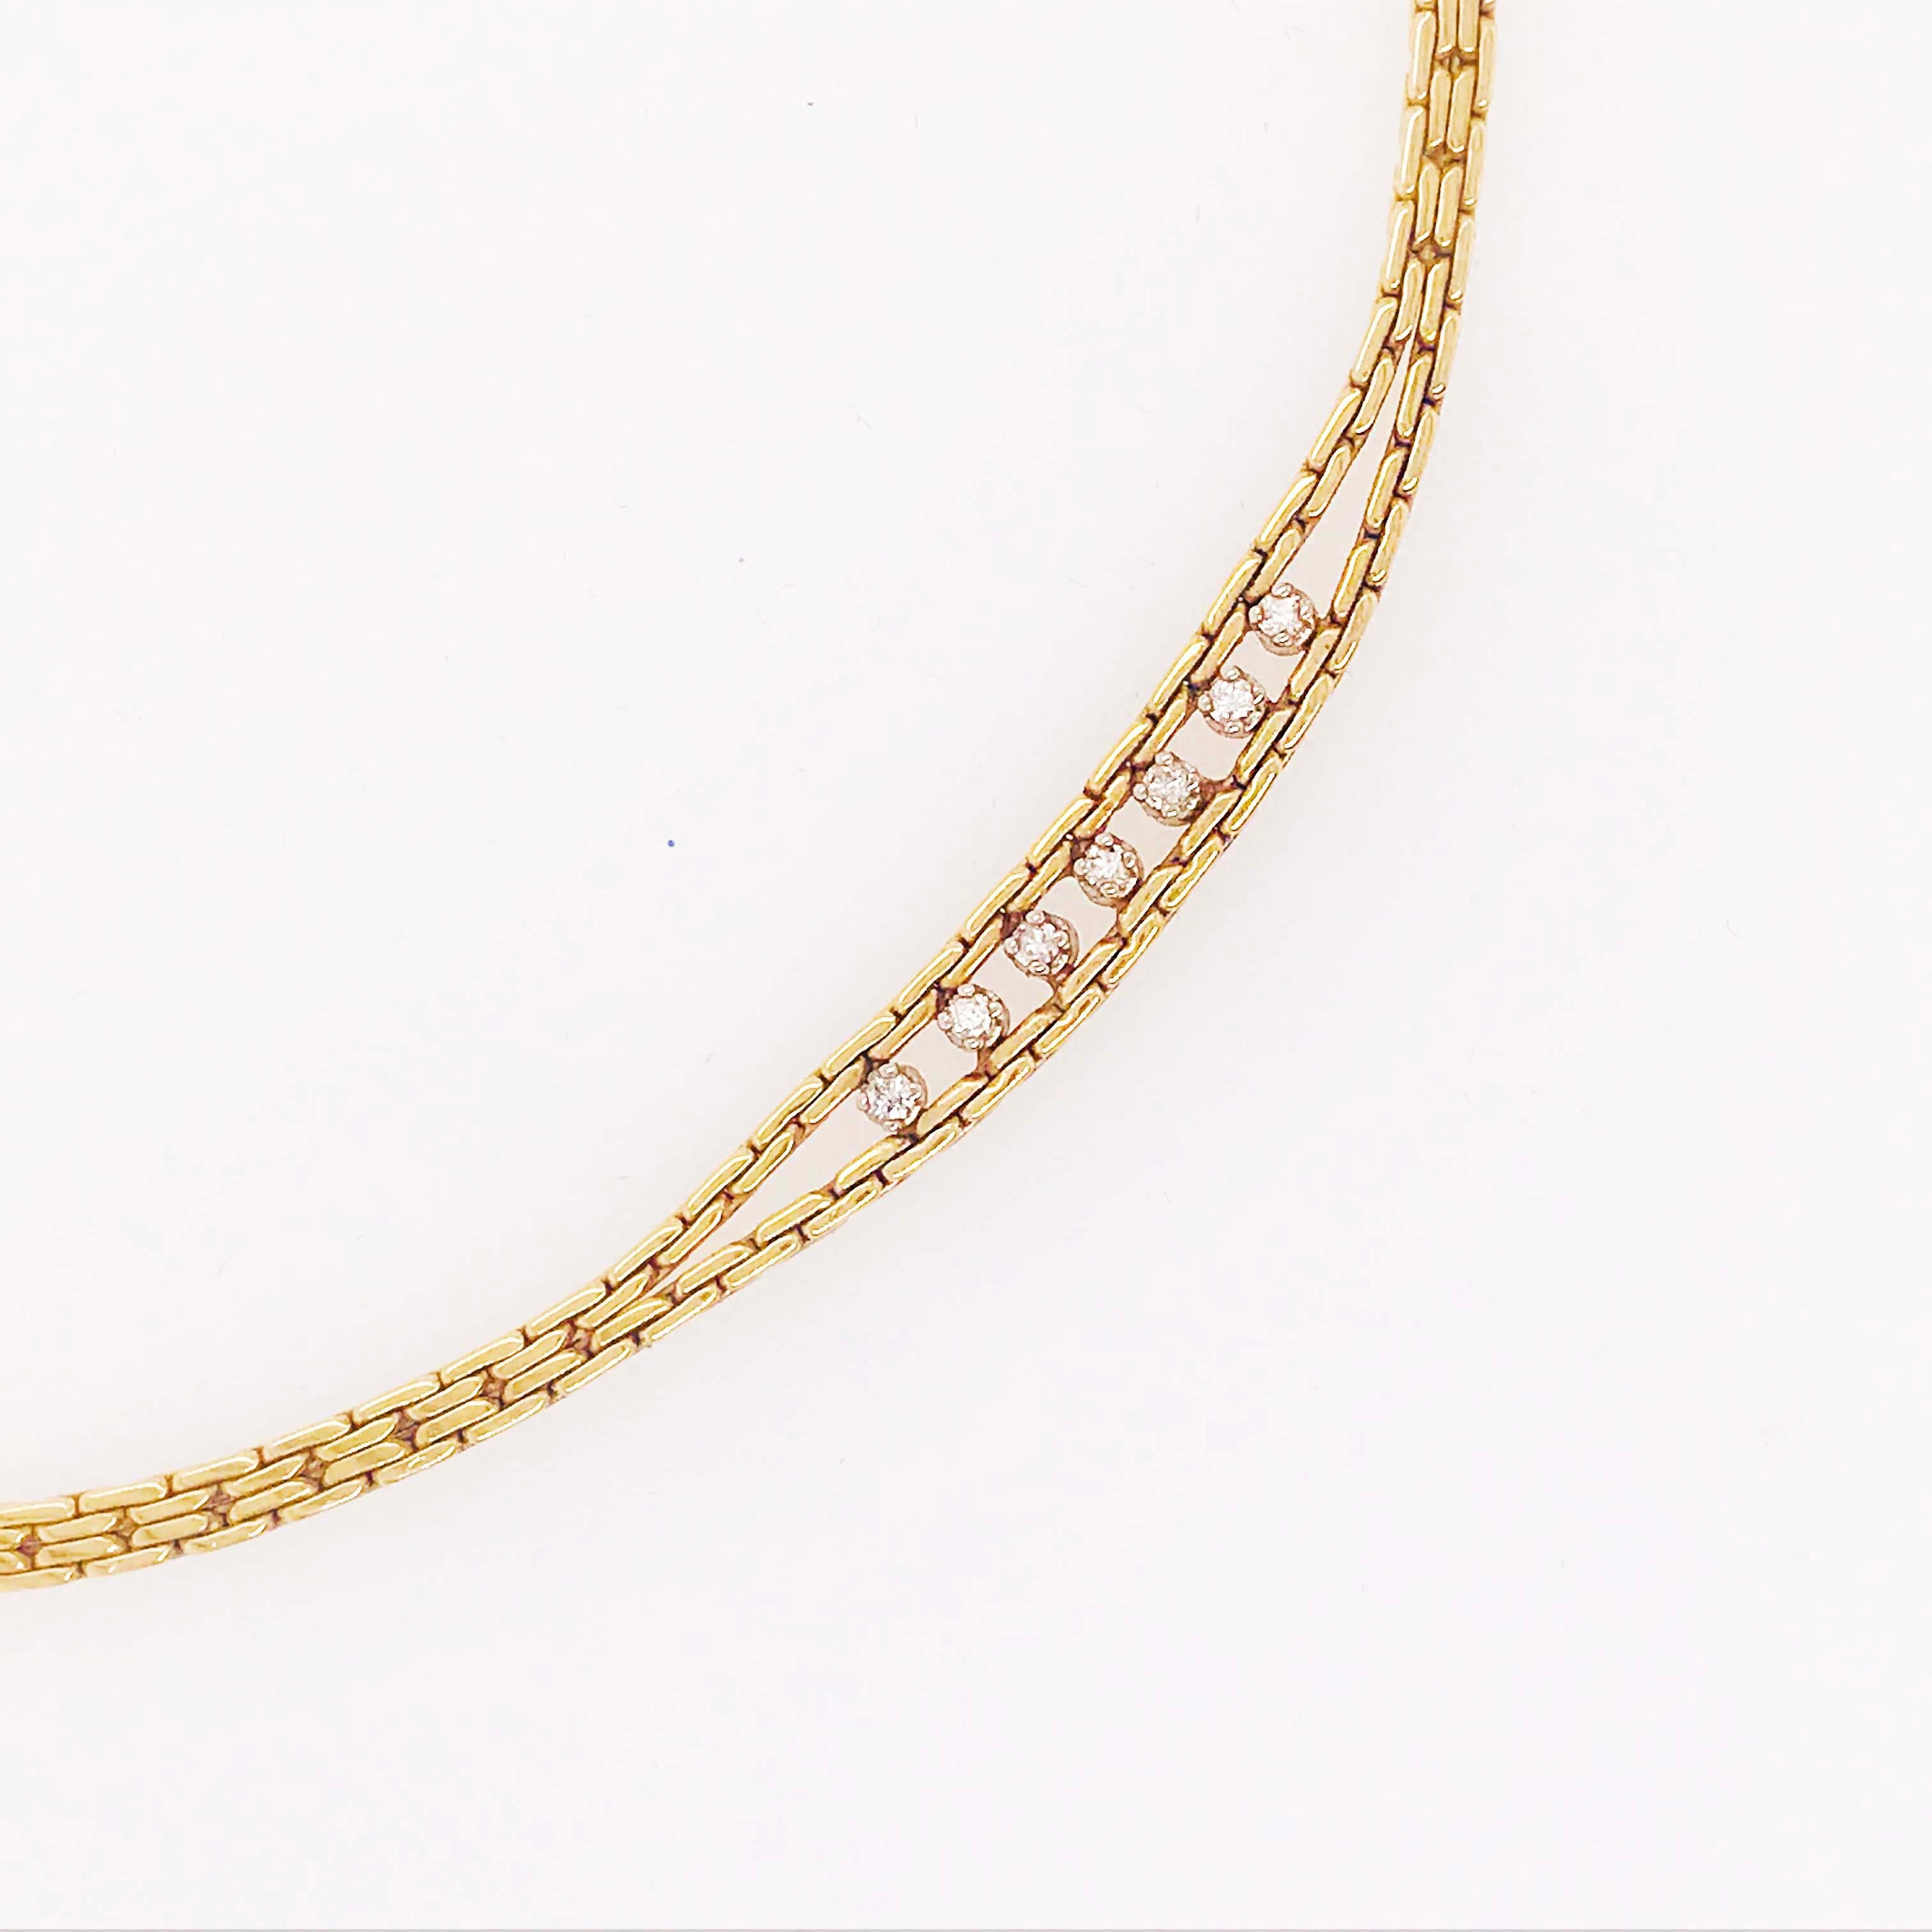 The diamond chain necklace has a distinctive design that's gorgeous and bold. The chain necklace is a flat custom chain with handmade links that are 3mm wide. The chain parts towards the bottom in an open, crescent moon shape. In the part there are